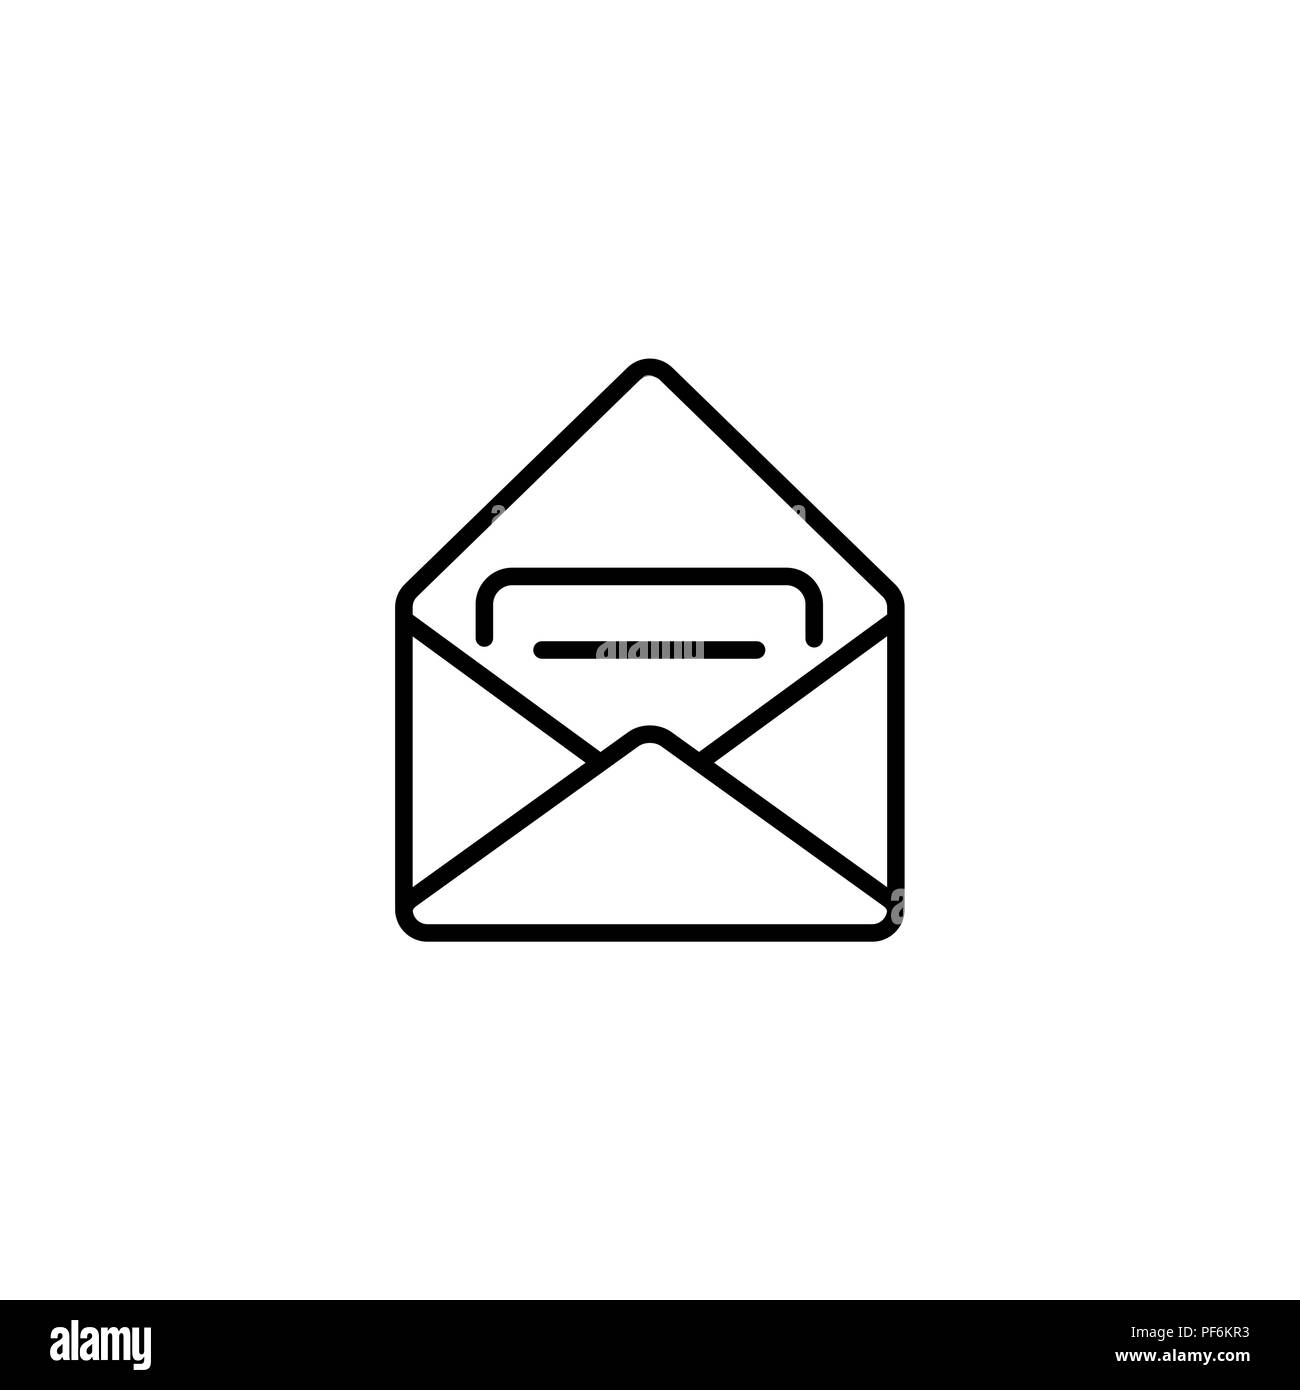 Web line icon. Received message black on white background Stock Vector